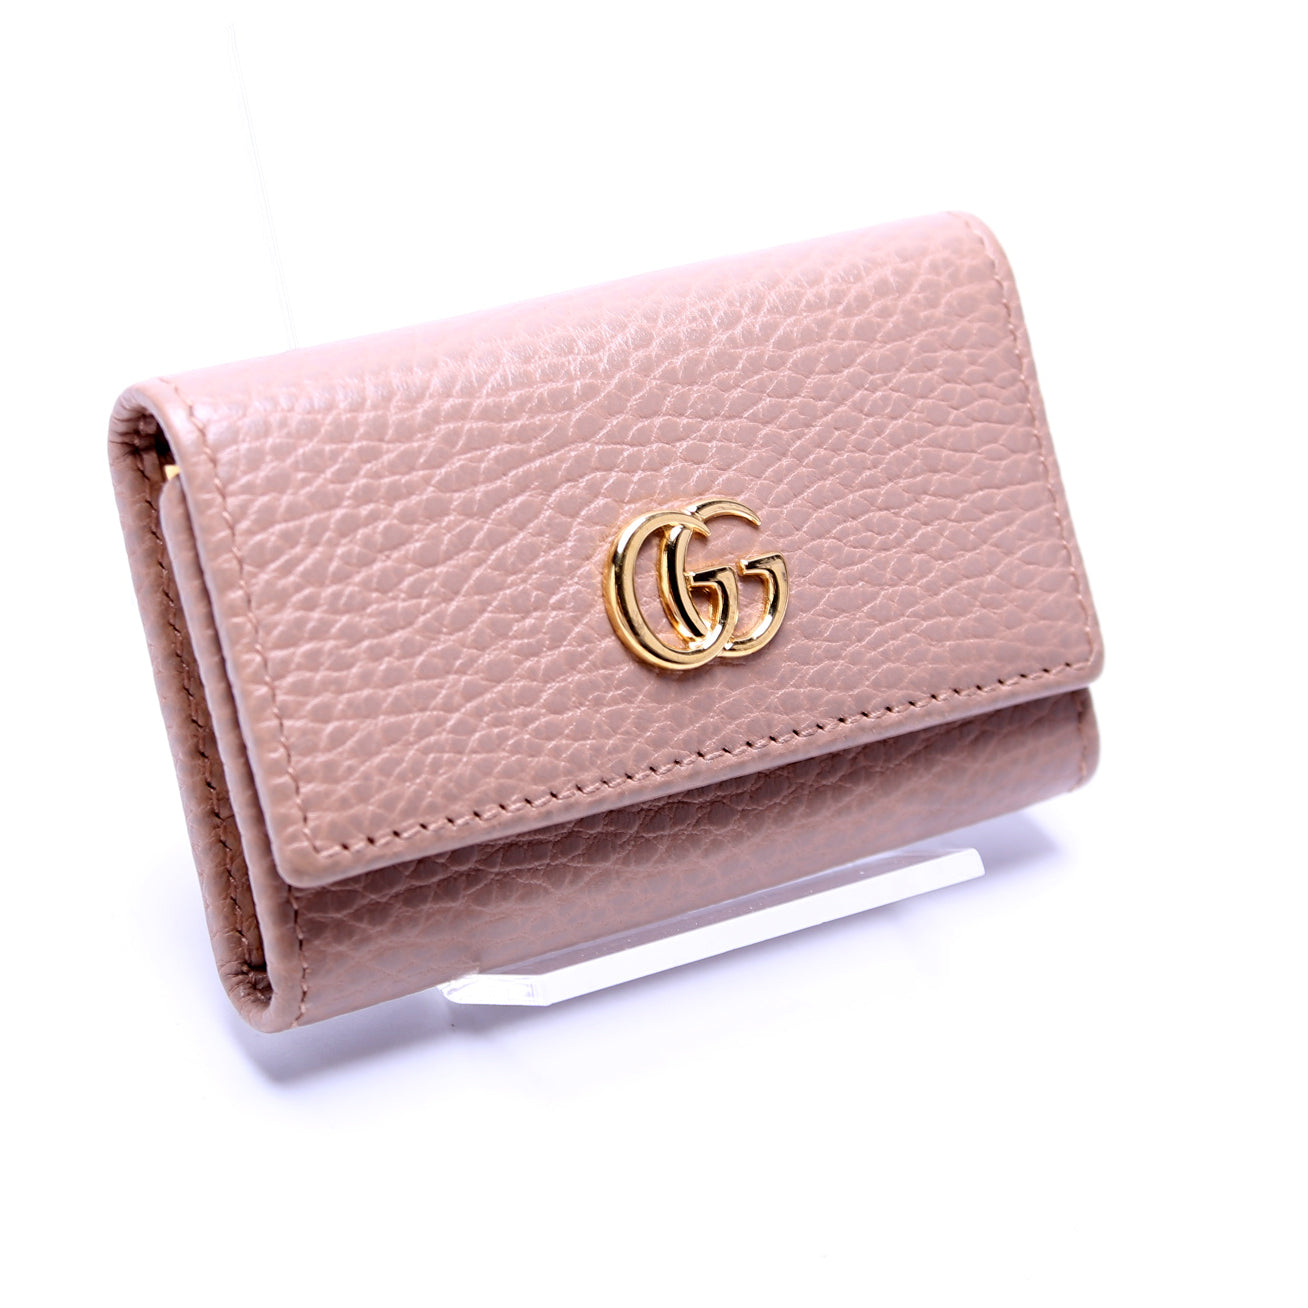 Gucci GG Marmont Key Case Gray Leather 6.5cmx9.5cmx2.5cm Free Shipping